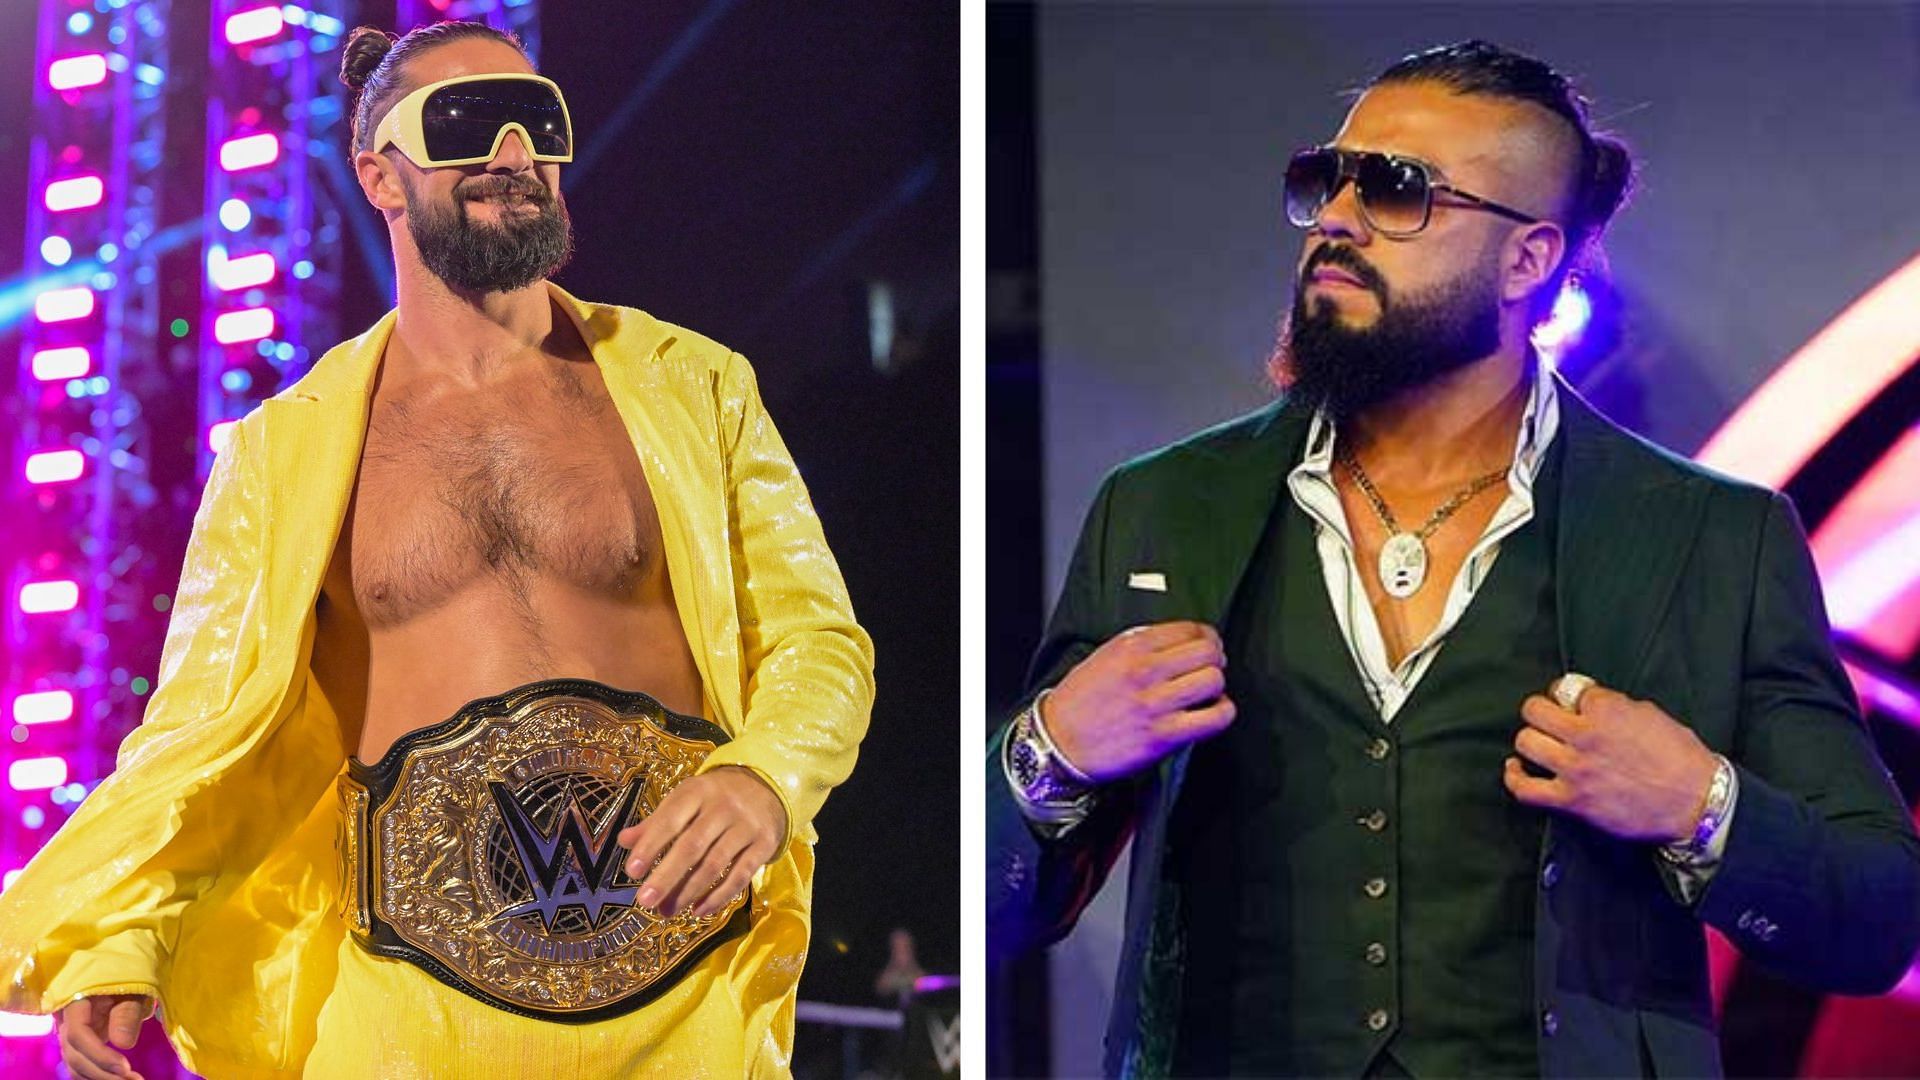 Andrade could potentially return to WWE as soon as RAW Day 1